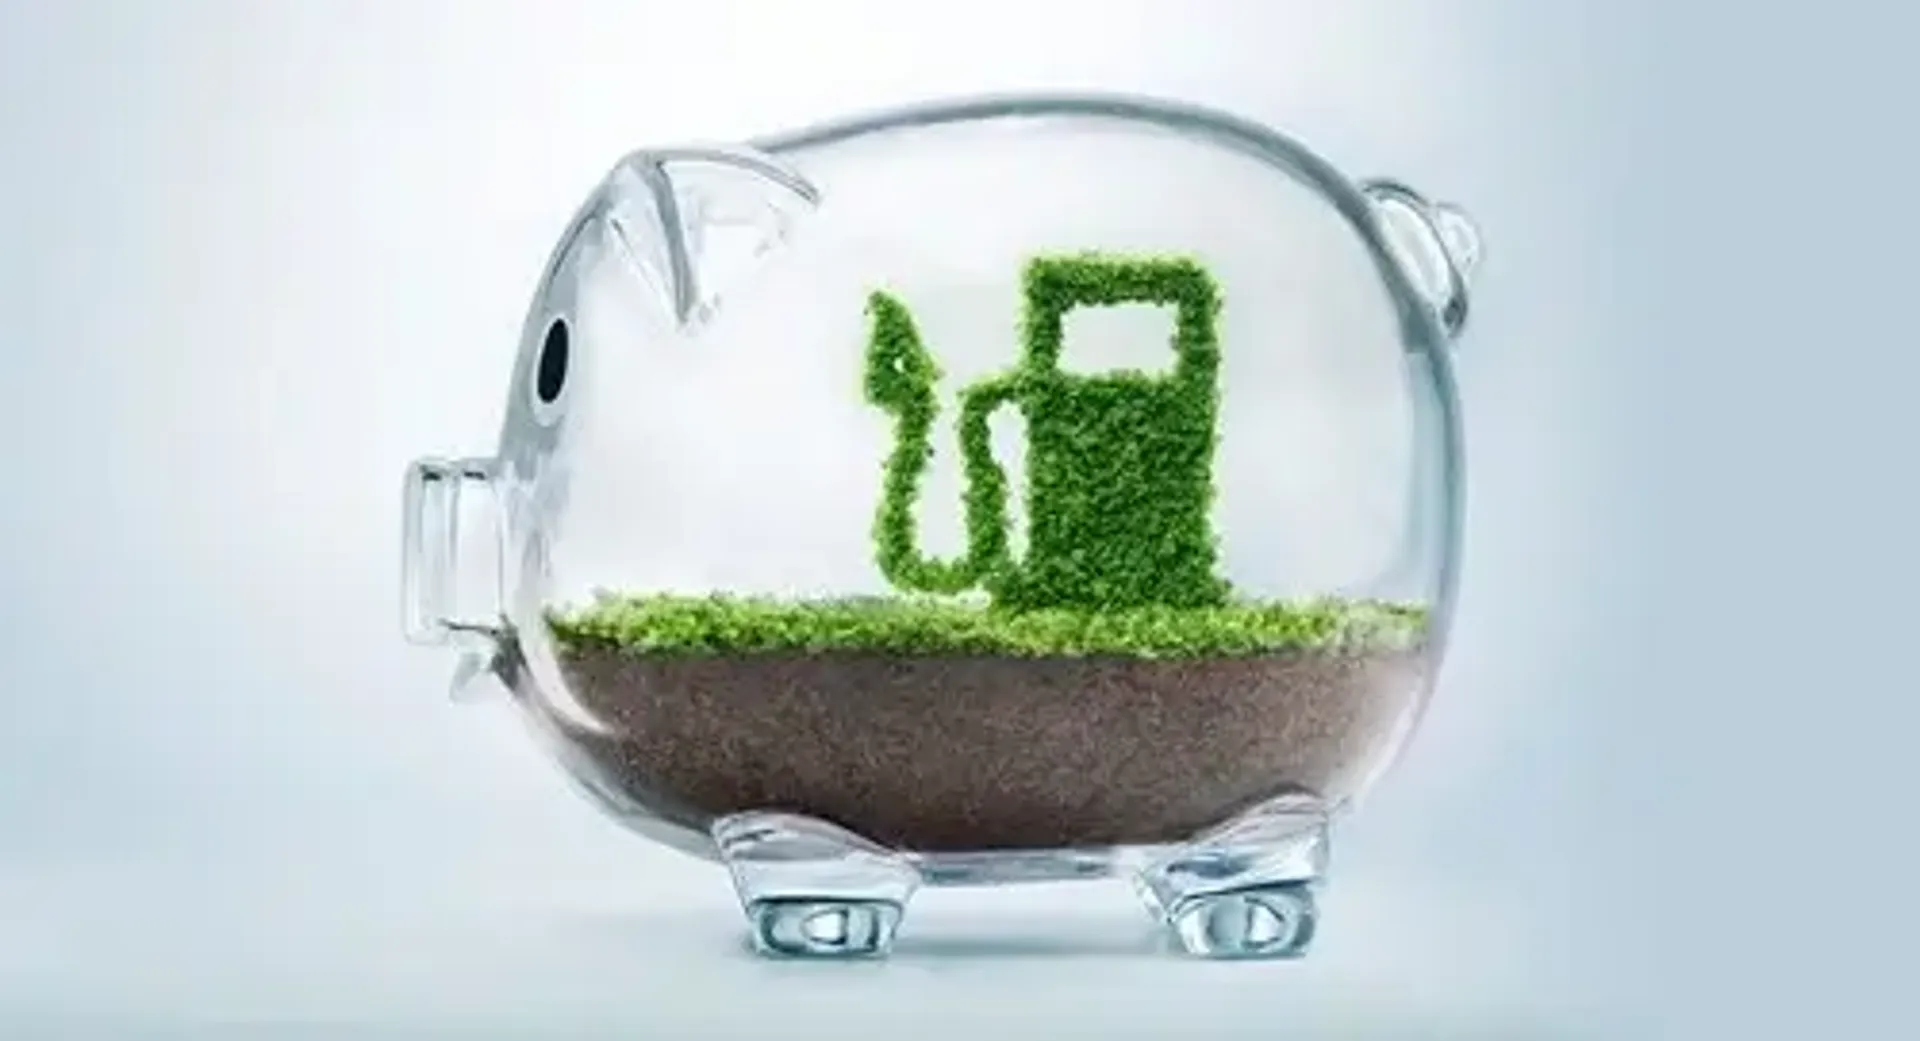 Green grass in a glass piggy bank with a fuel pump - a sustainable investment for a greener future.